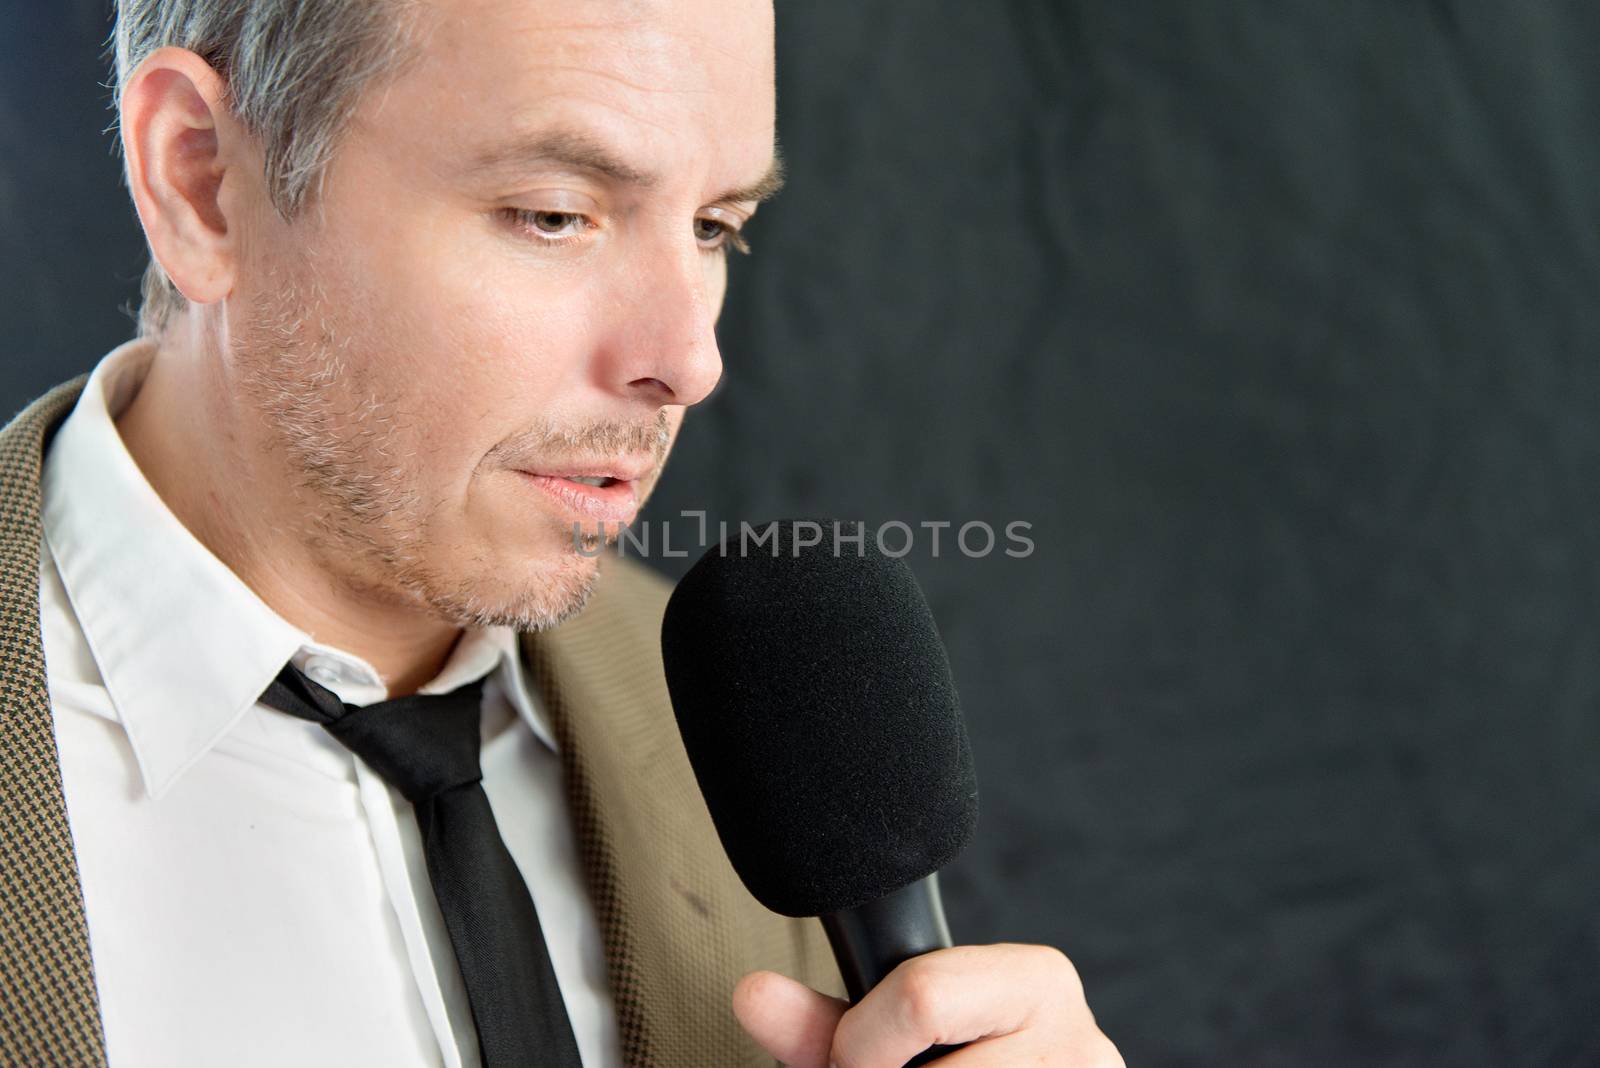 Close-up of serious man speaking into microphone, side.